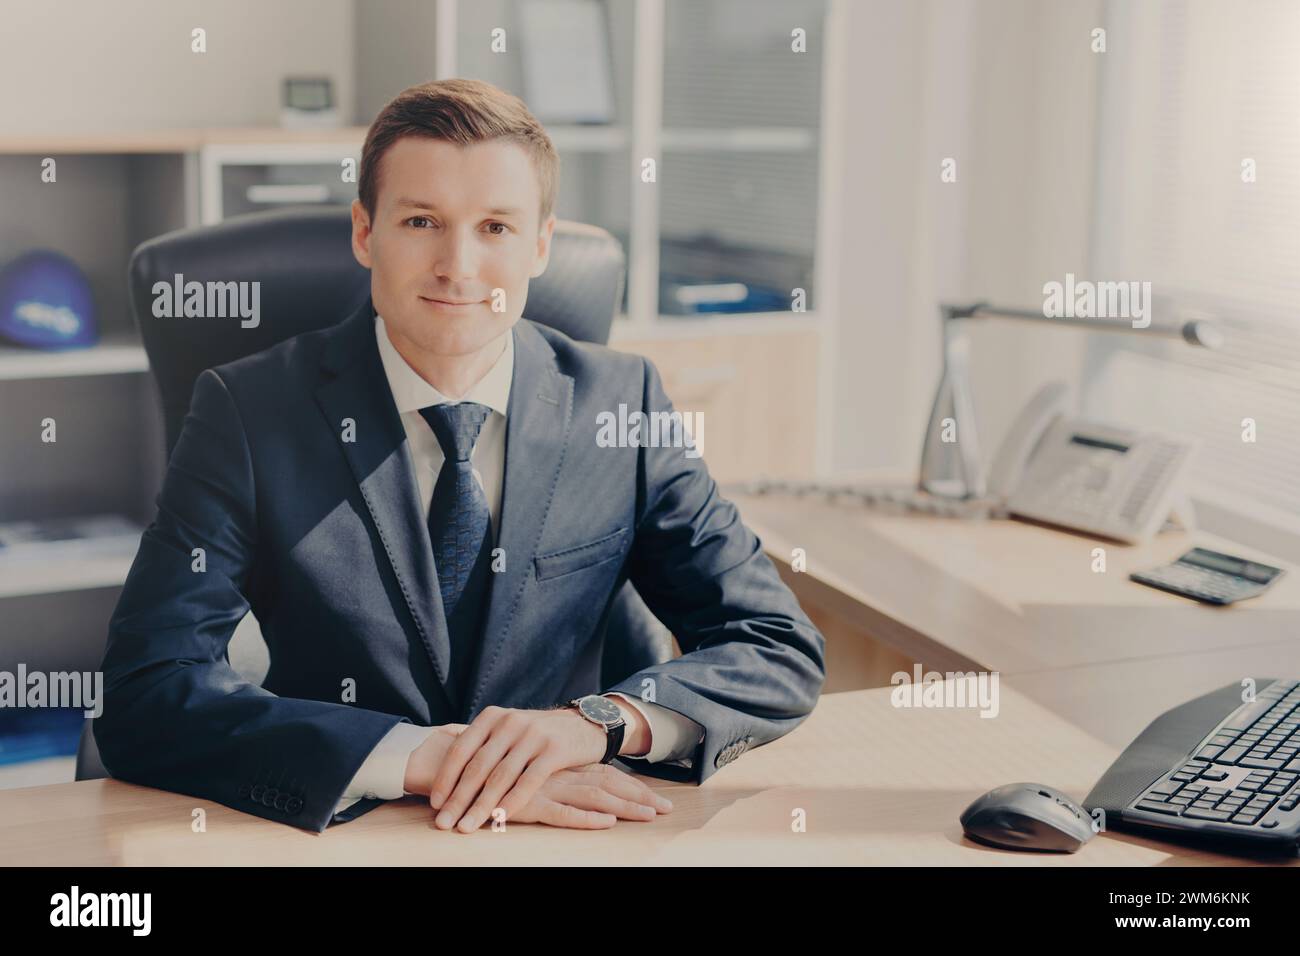 Confident businessman smiles gently in a well-lit office setting, exuding professionalism. Stock Photo